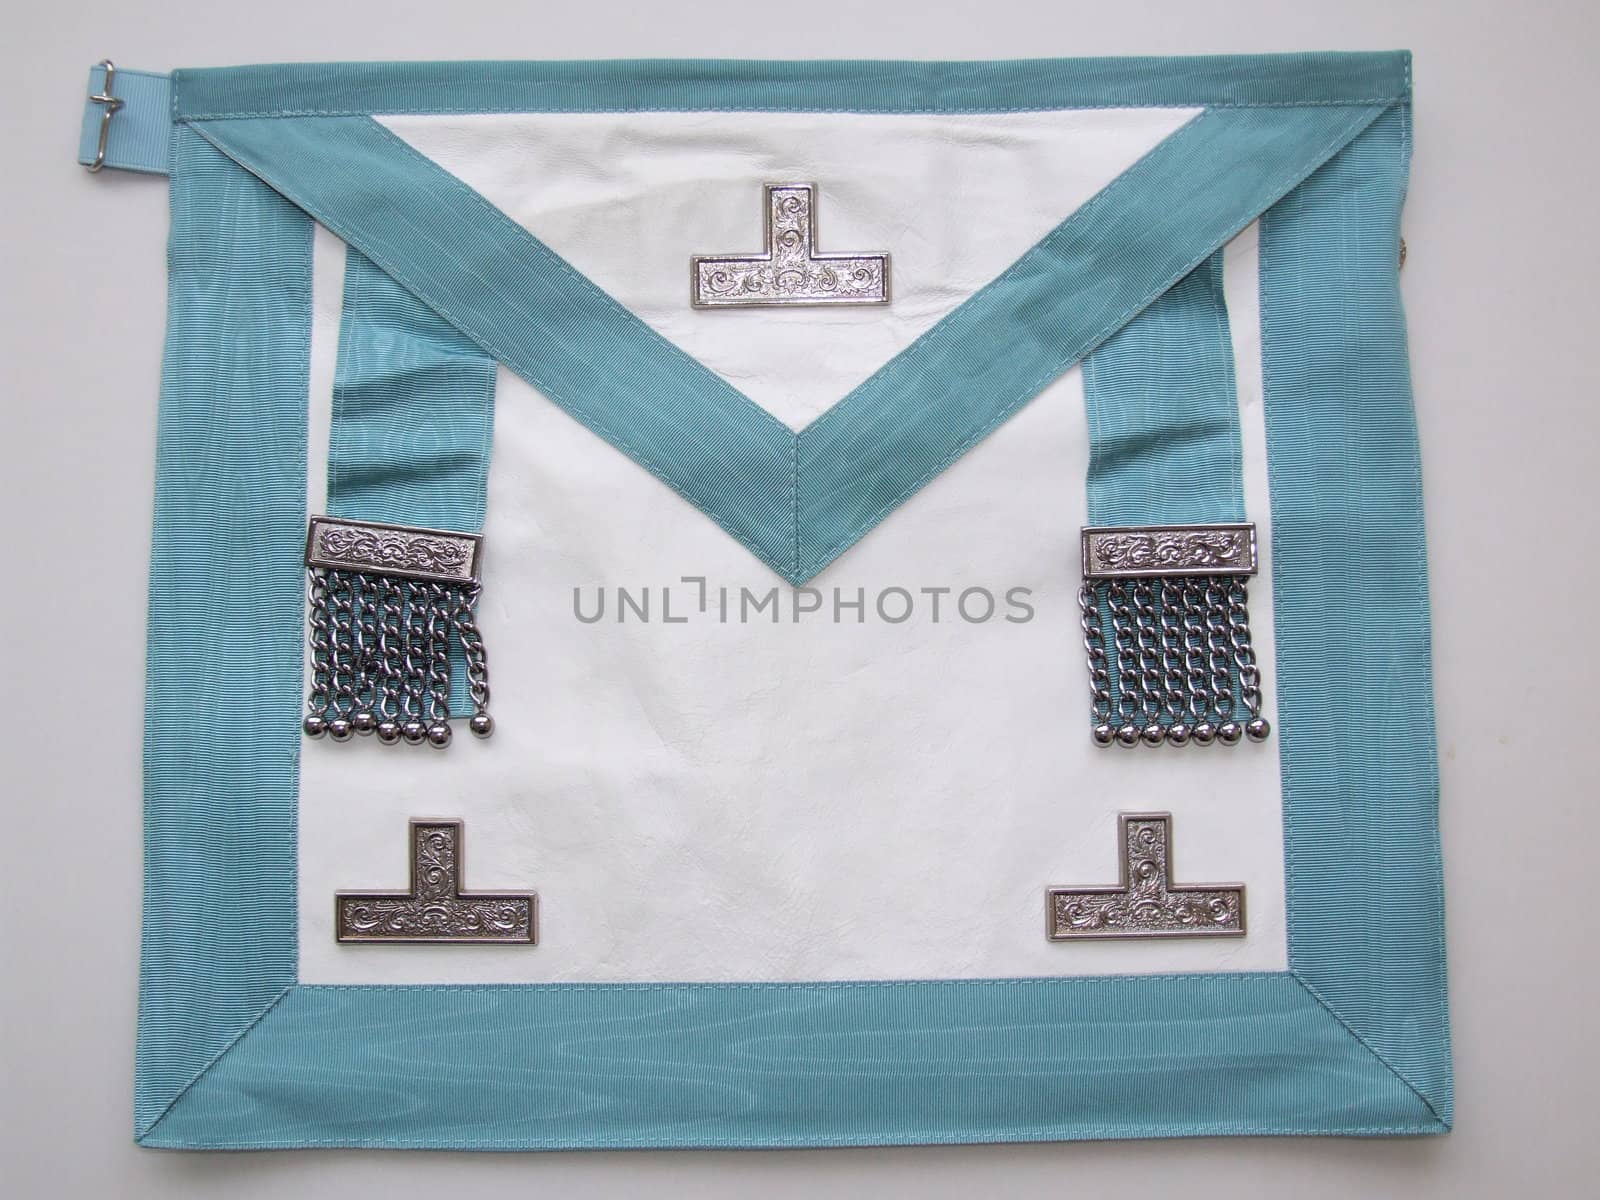 A masonic apron of a Lodge master in the province of sussex england